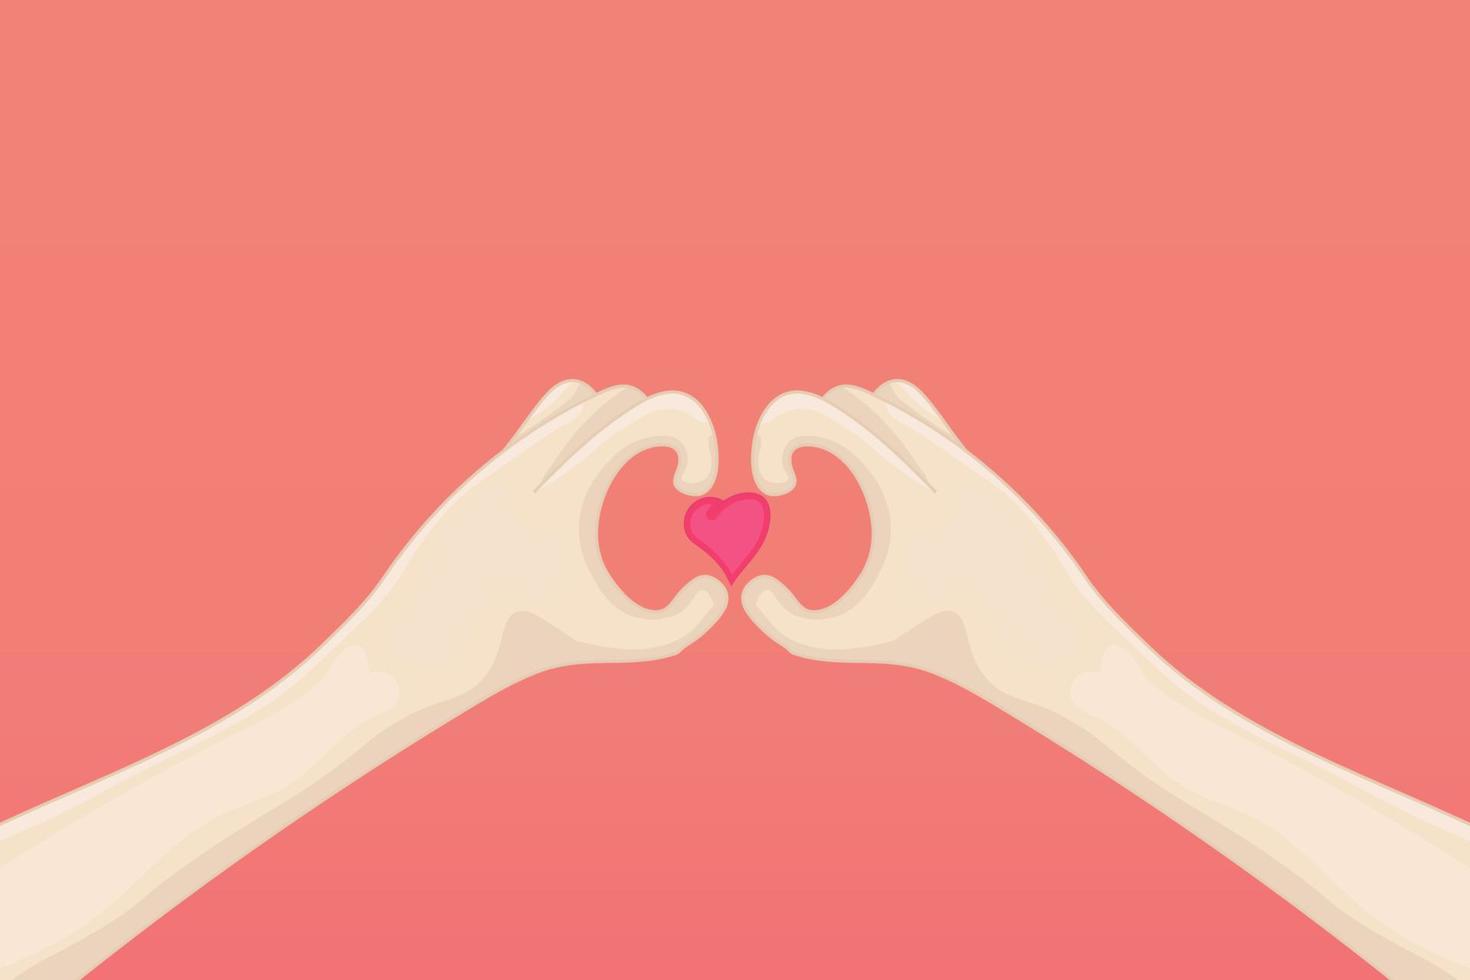 Hands fold the shape of a heart. Finger gesture sign. Element for design. Vector illustration on an isolated pink background.